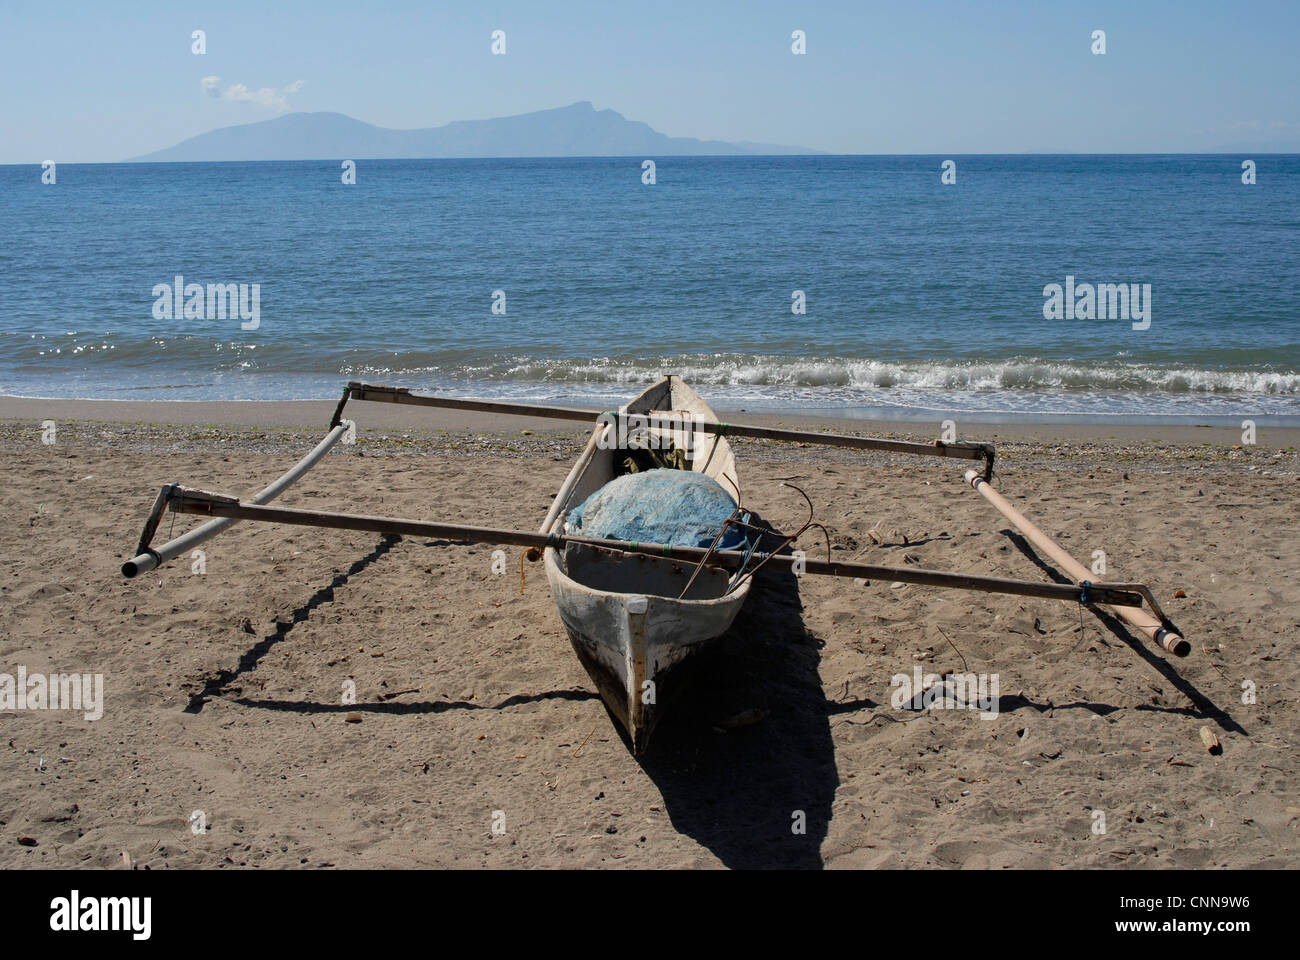 Traditional  fisherman's outrigger on the beach in Dili Timor Leste, with Atauro island on the horizon. Stock Photo